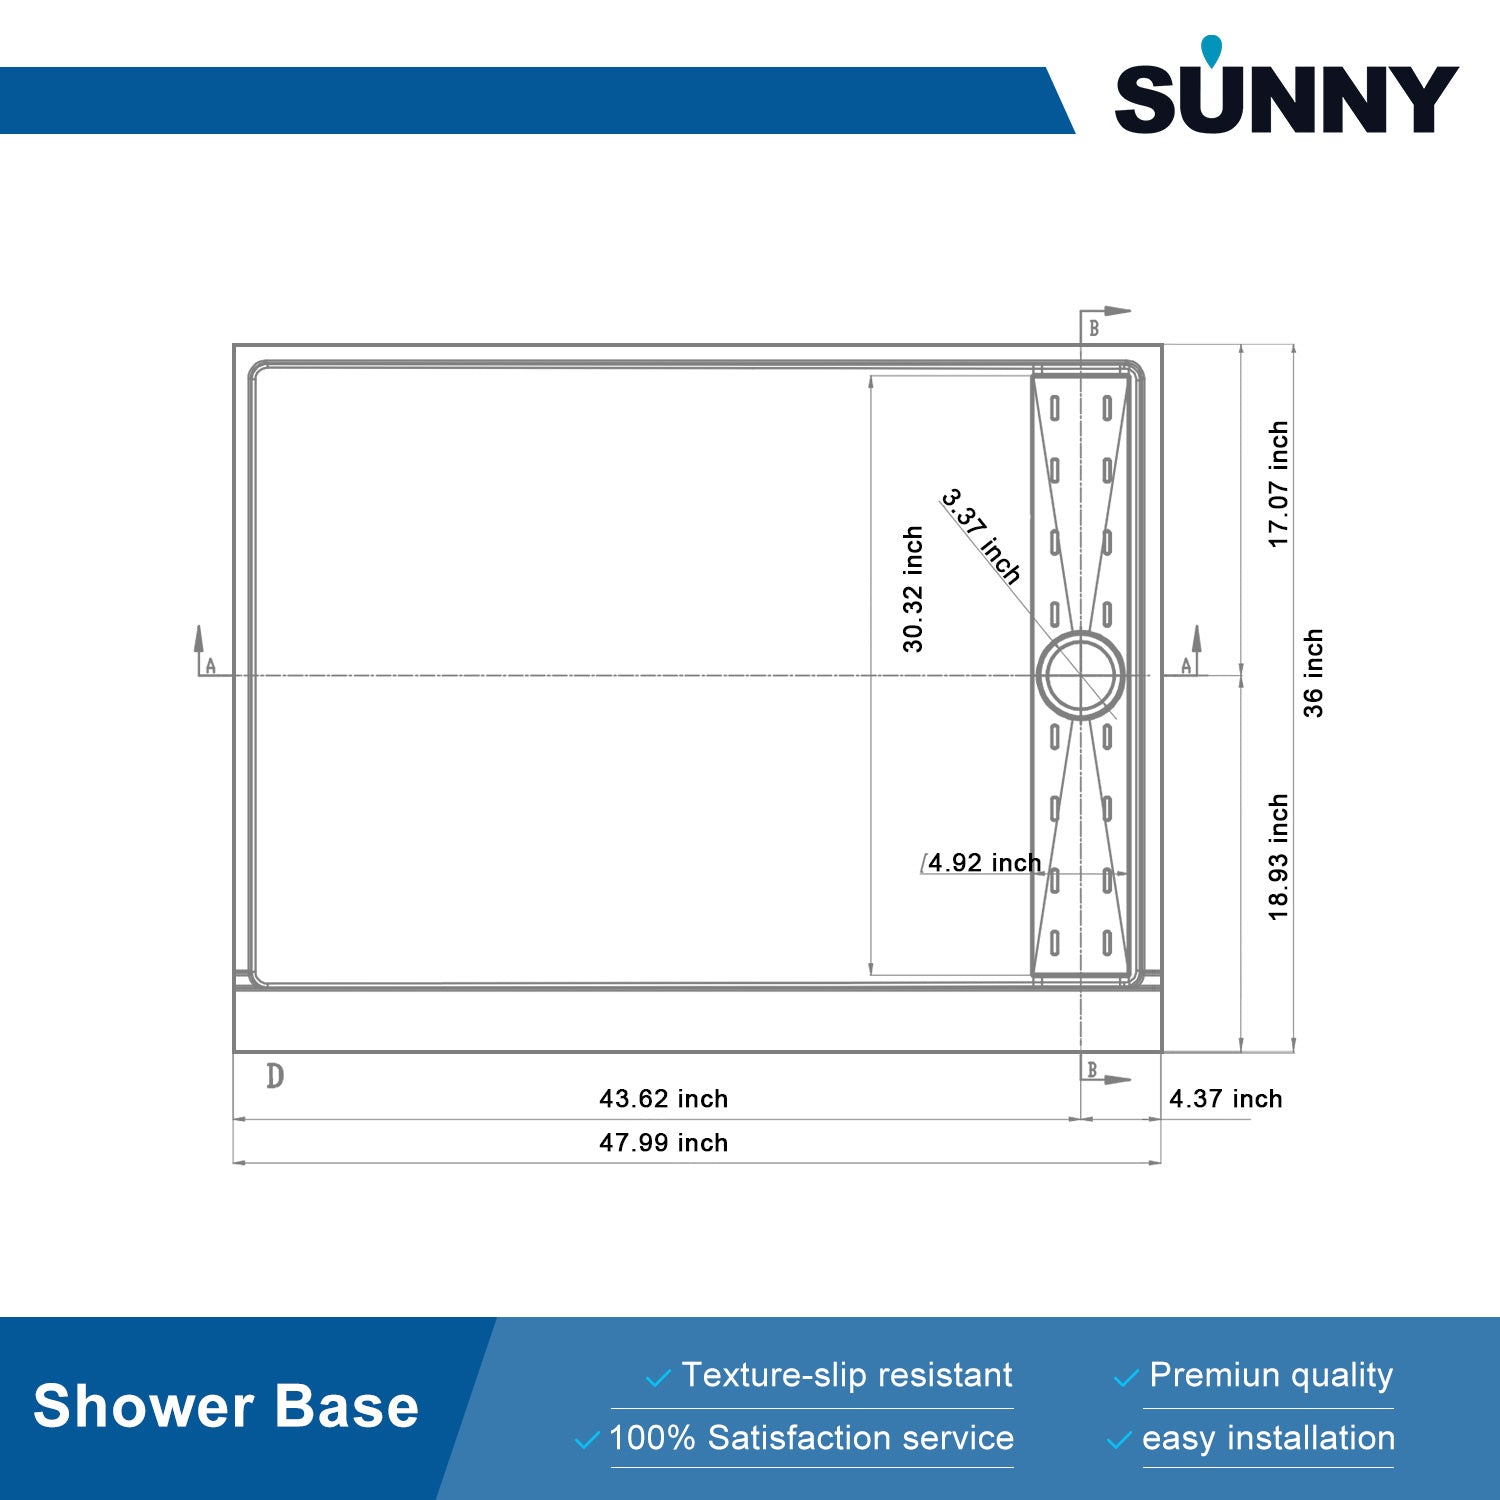 SUNNY SHOWER 36 in. W x 48 in. D x 4 in. H White Right Drain Rectangular Bases Size Chart - SUNNY SHOWER